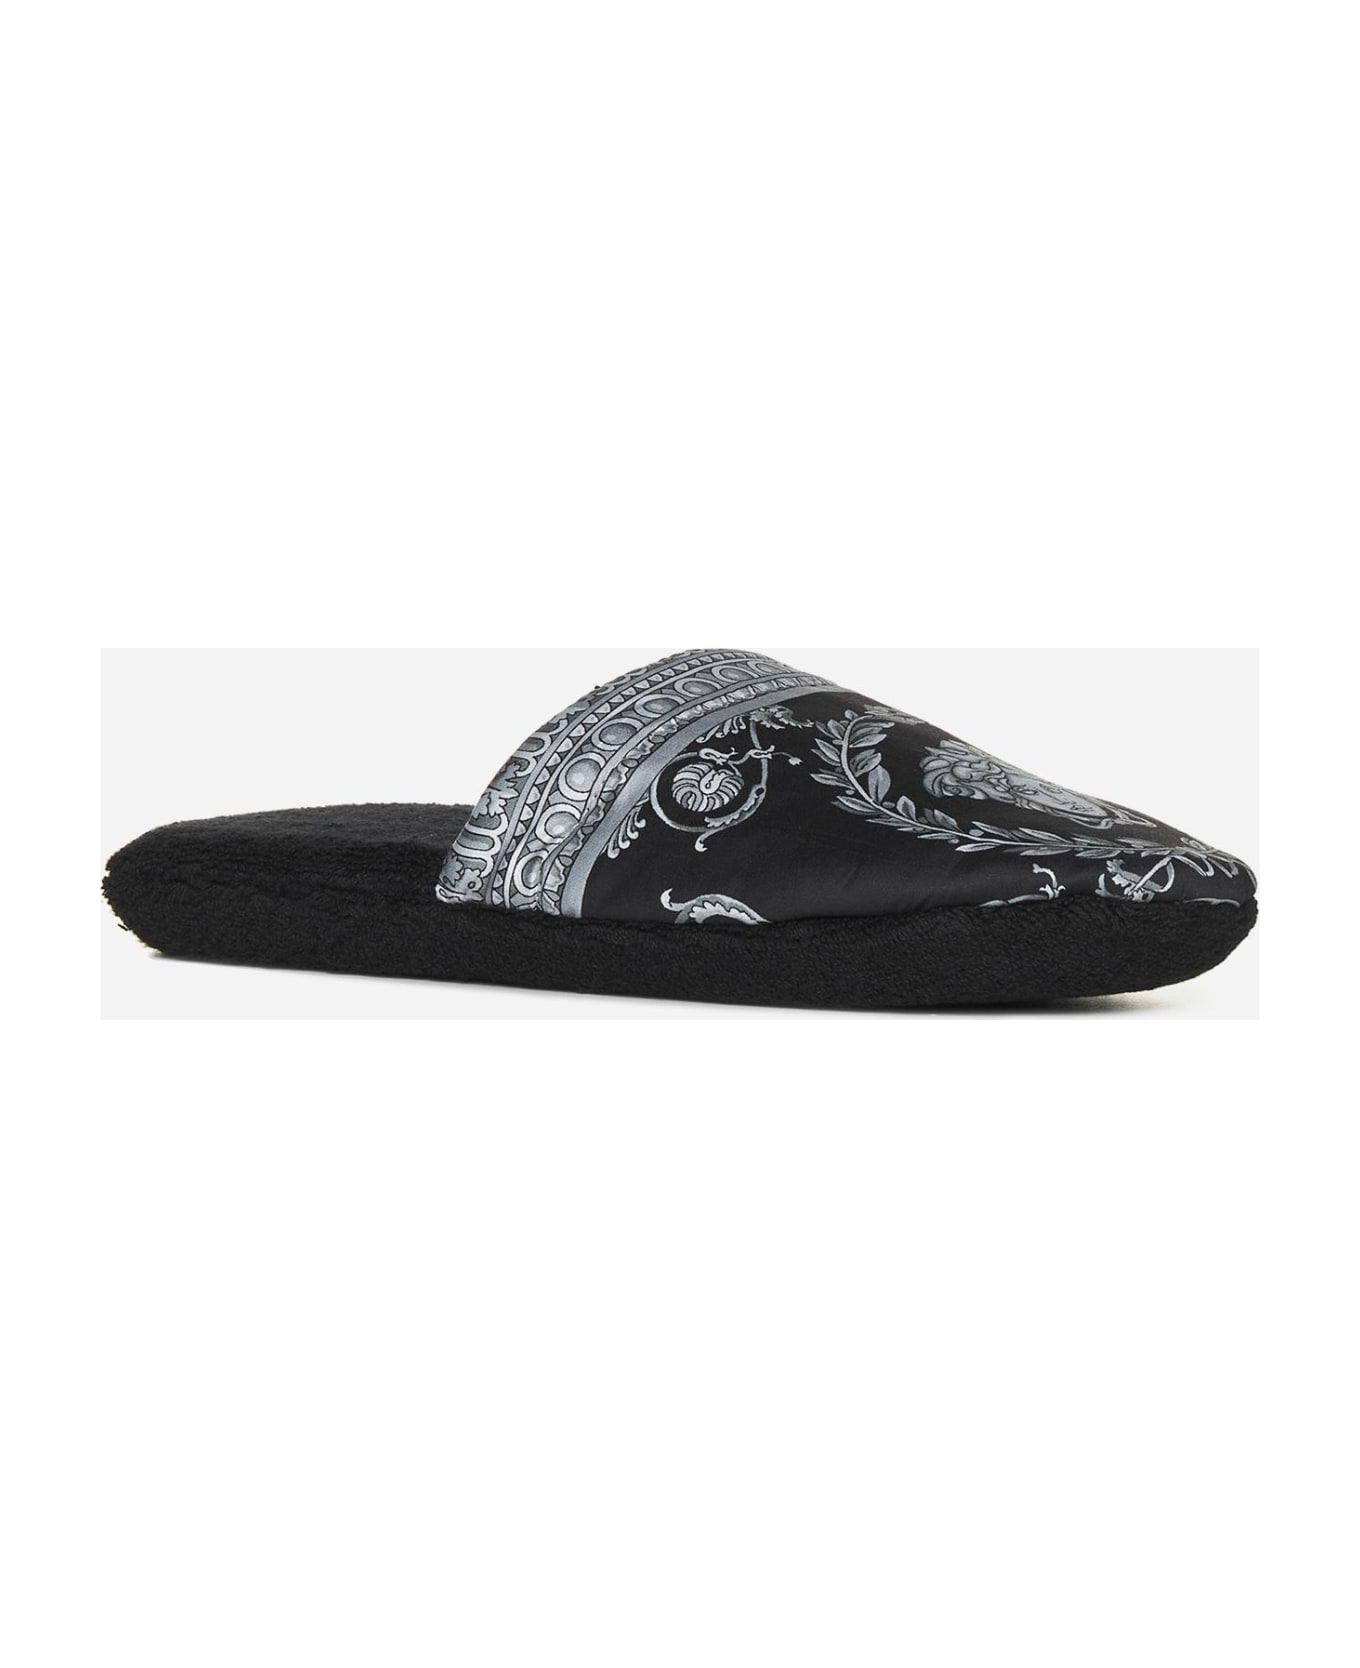 Versace Barocco Print Cotton Slippers その他各種シューズ